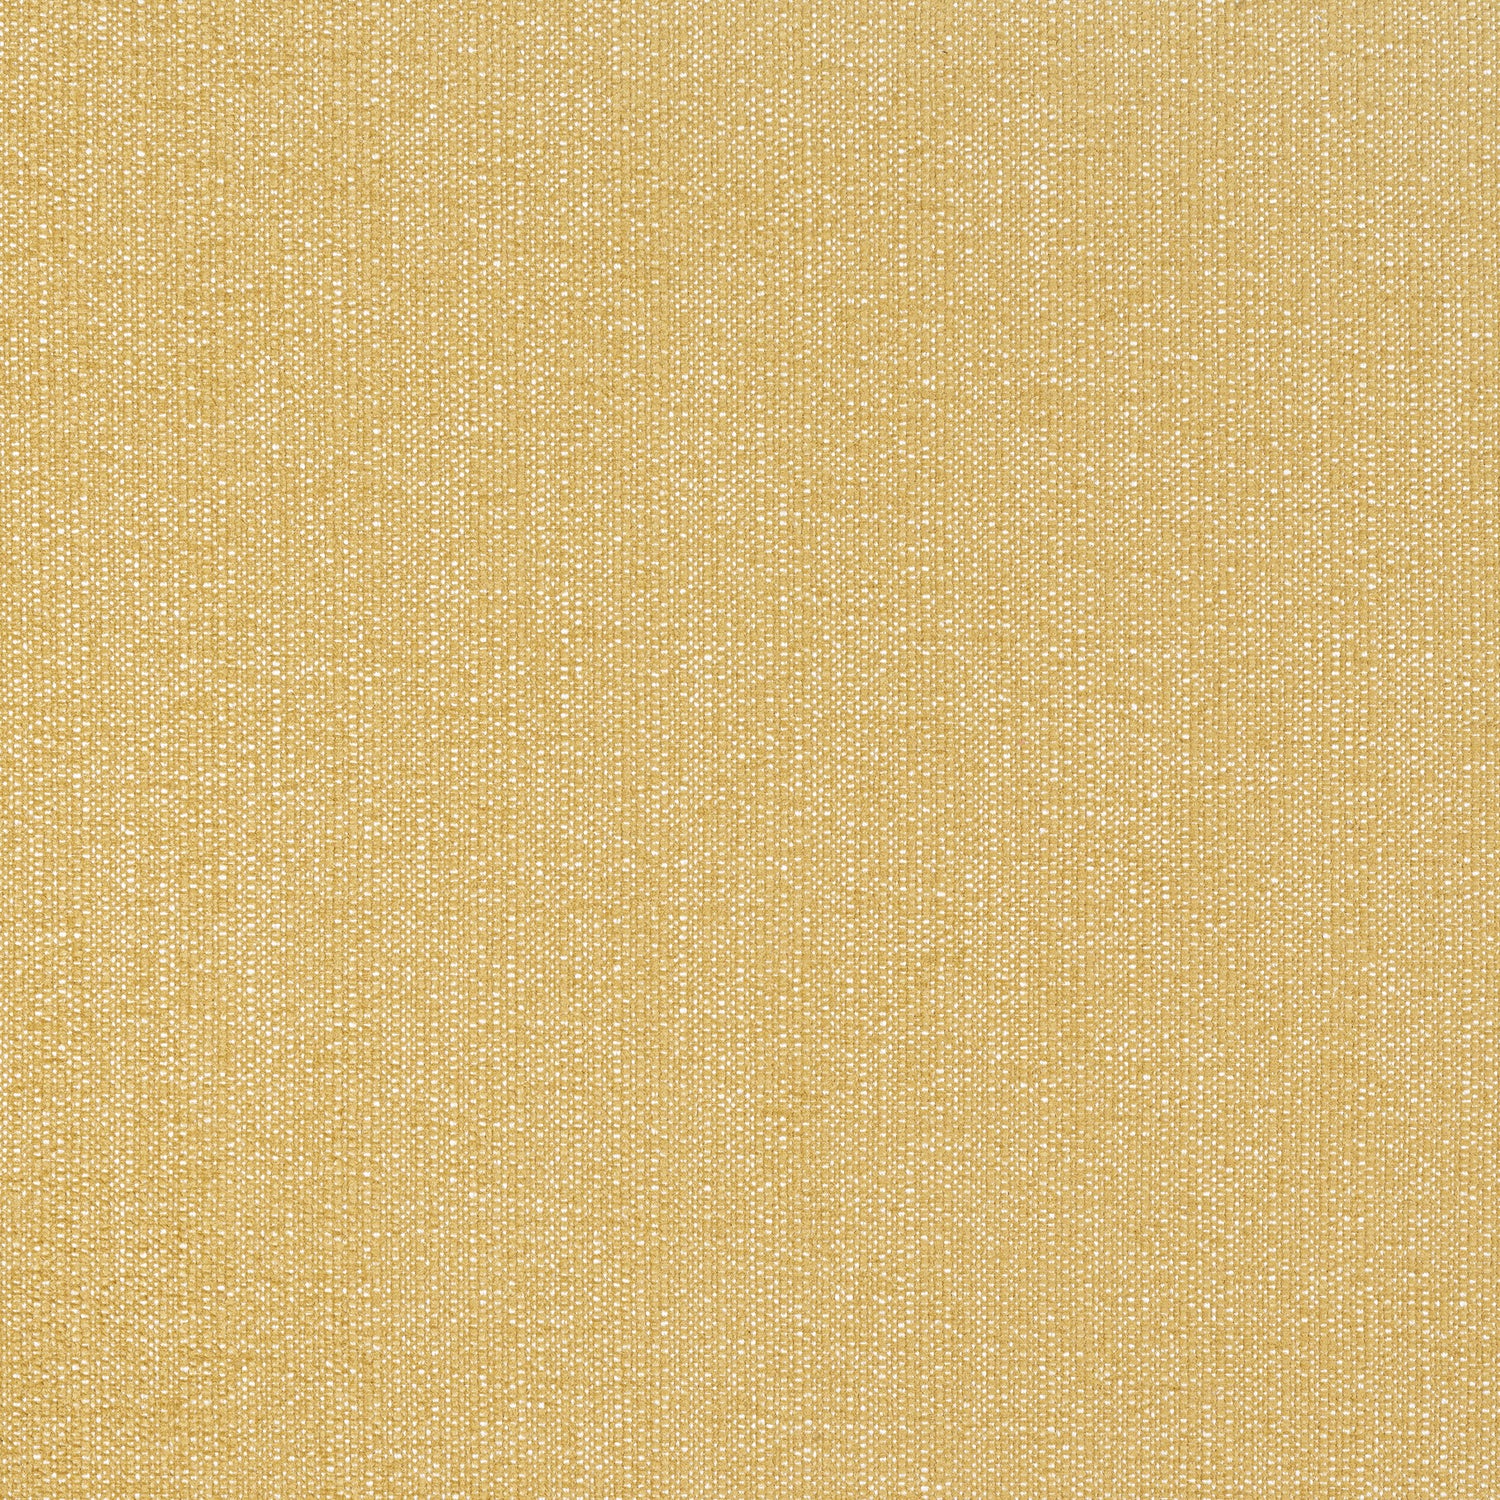 Veda fabric in straw color - pattern number W8715 - by Thibaut in the Haven Textures collection